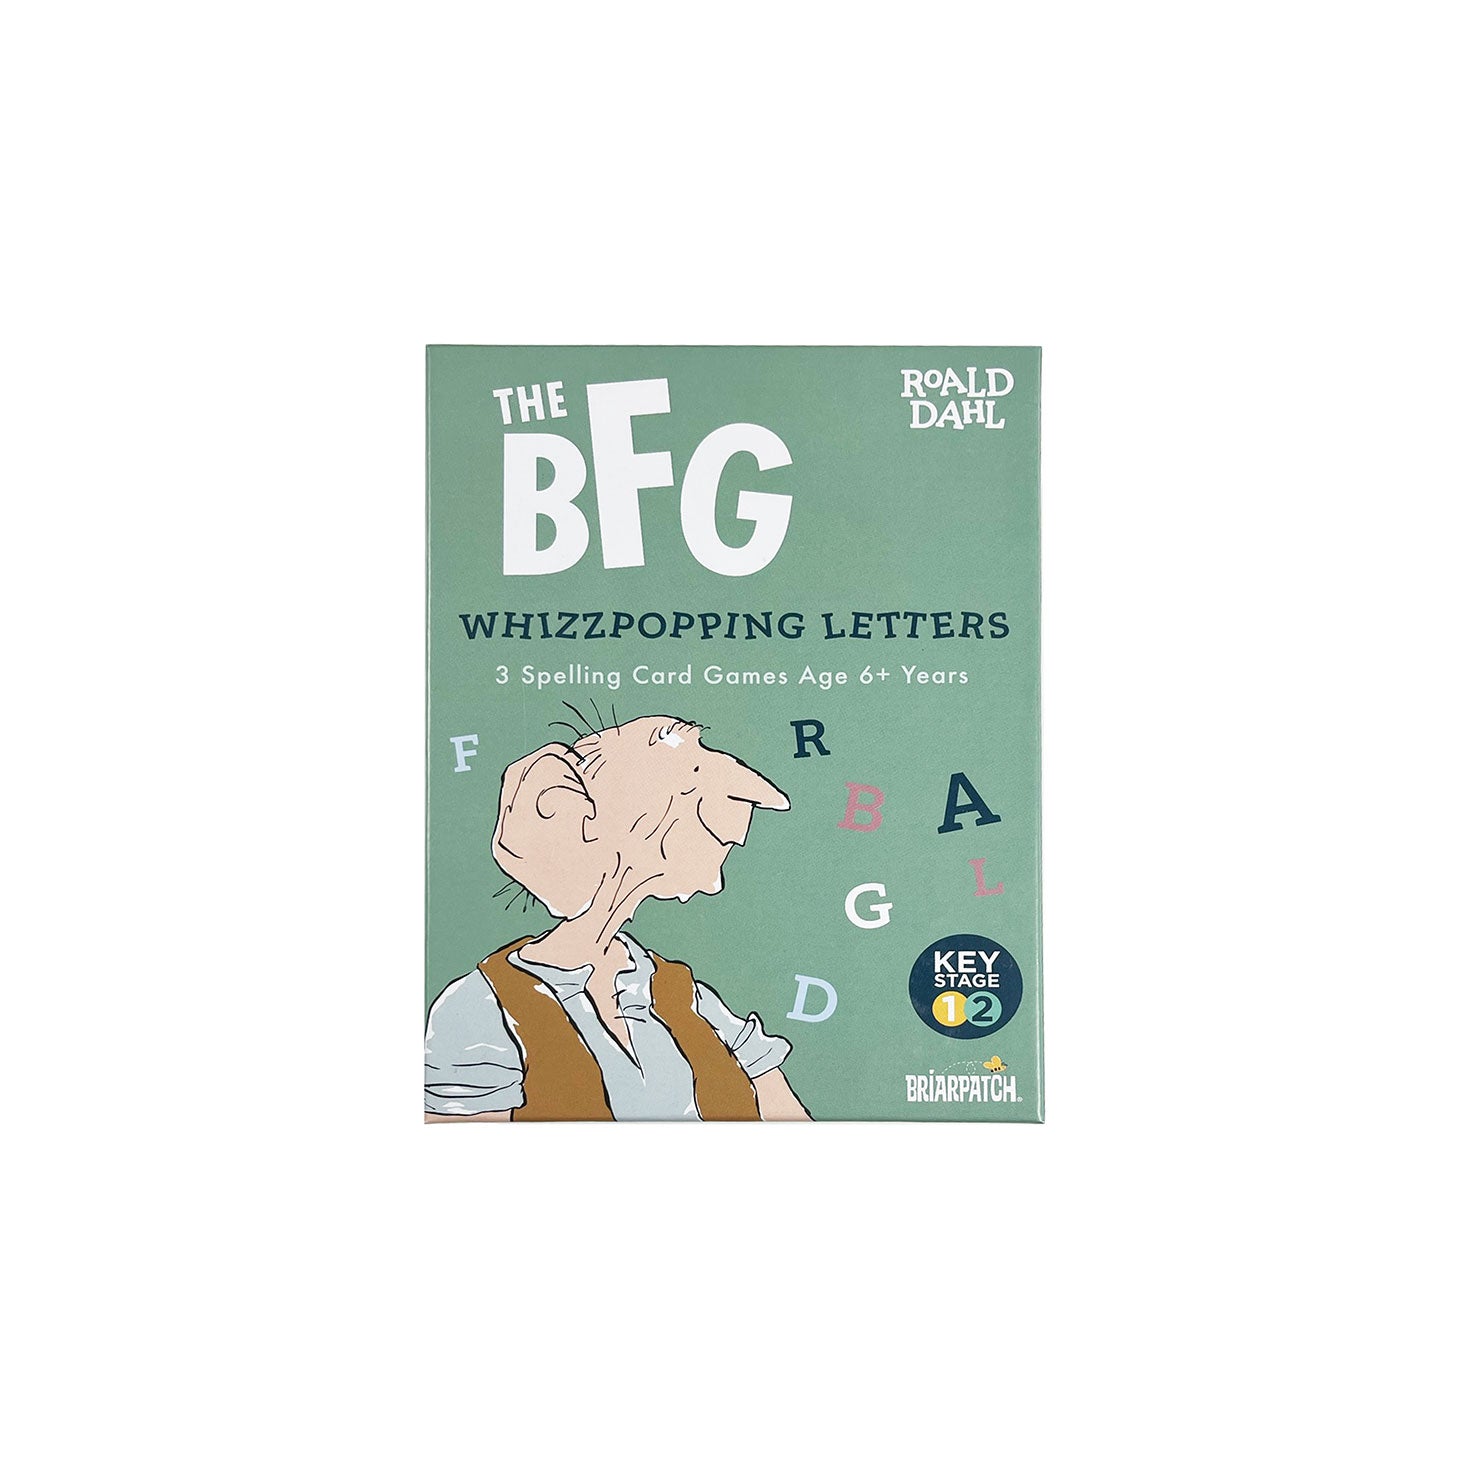 The BFG Whizzpopping Letter game based on Roald Dahl's story with Quentin Blake illustrations